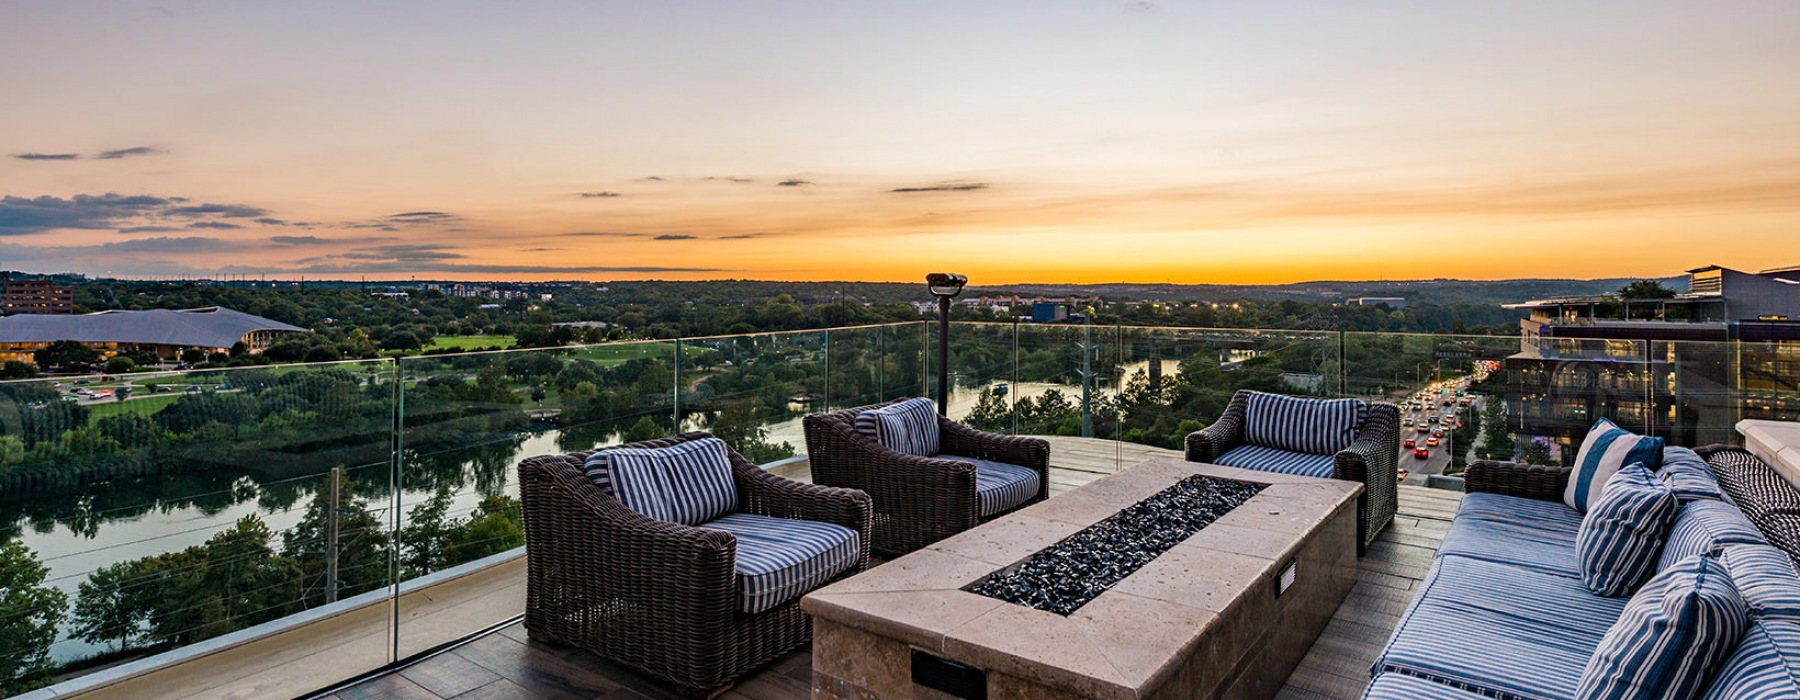 Large fire pit with seating overlooking the city 